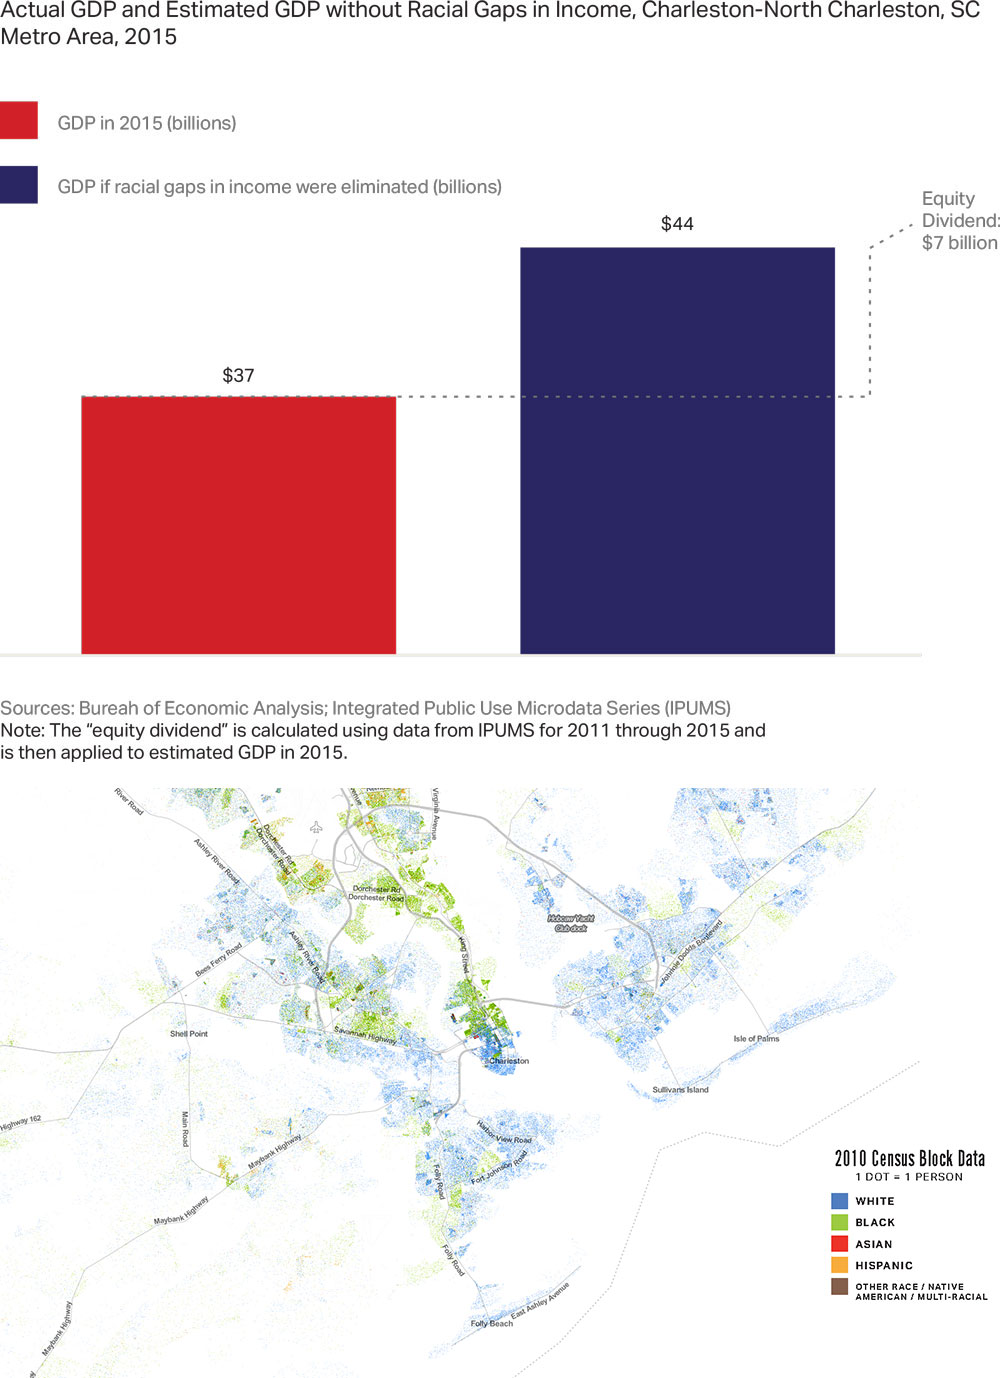 Bar charts and map of racial distribution in Charleston, SC